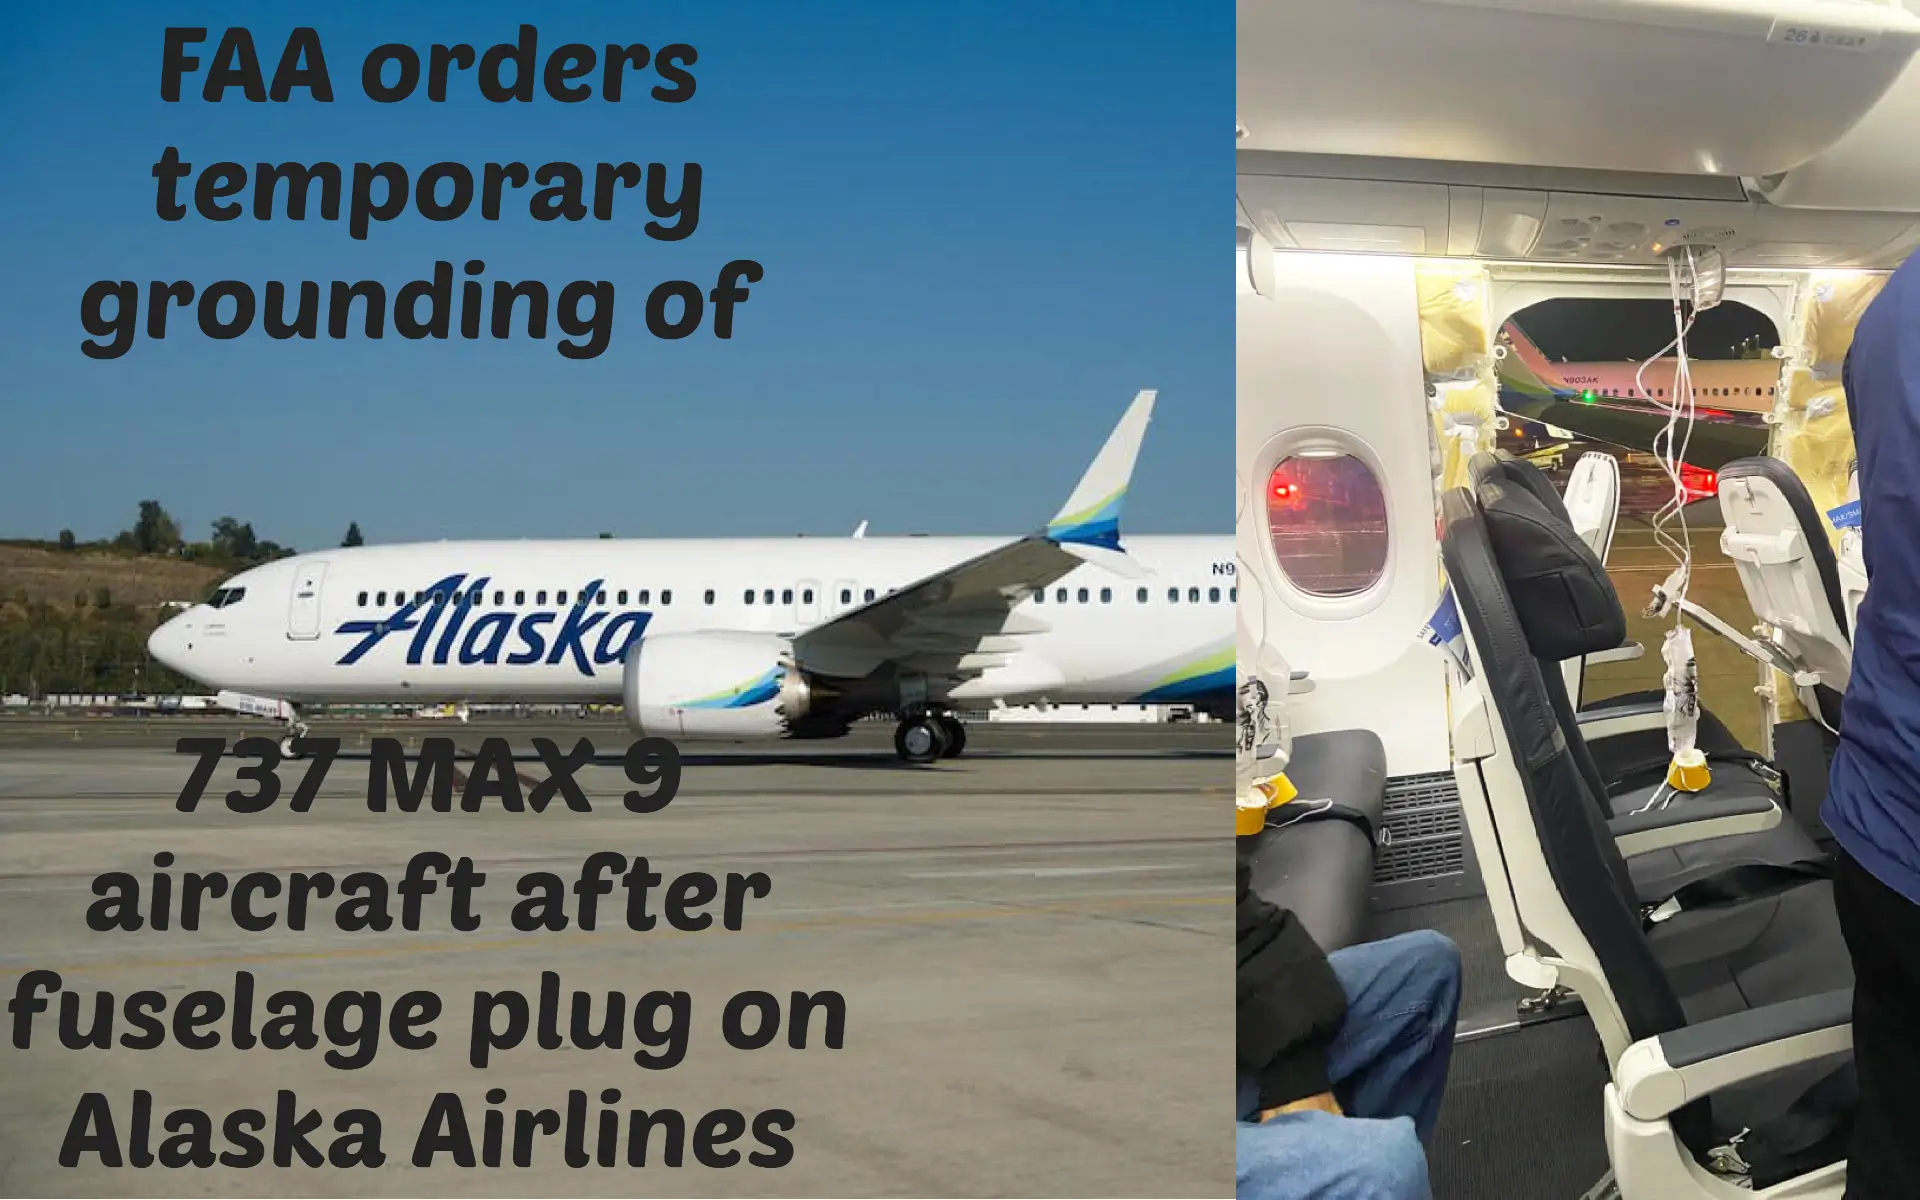 Alaska Airlines Boeing 737 Max 9 Incident: An In-depth Analysis